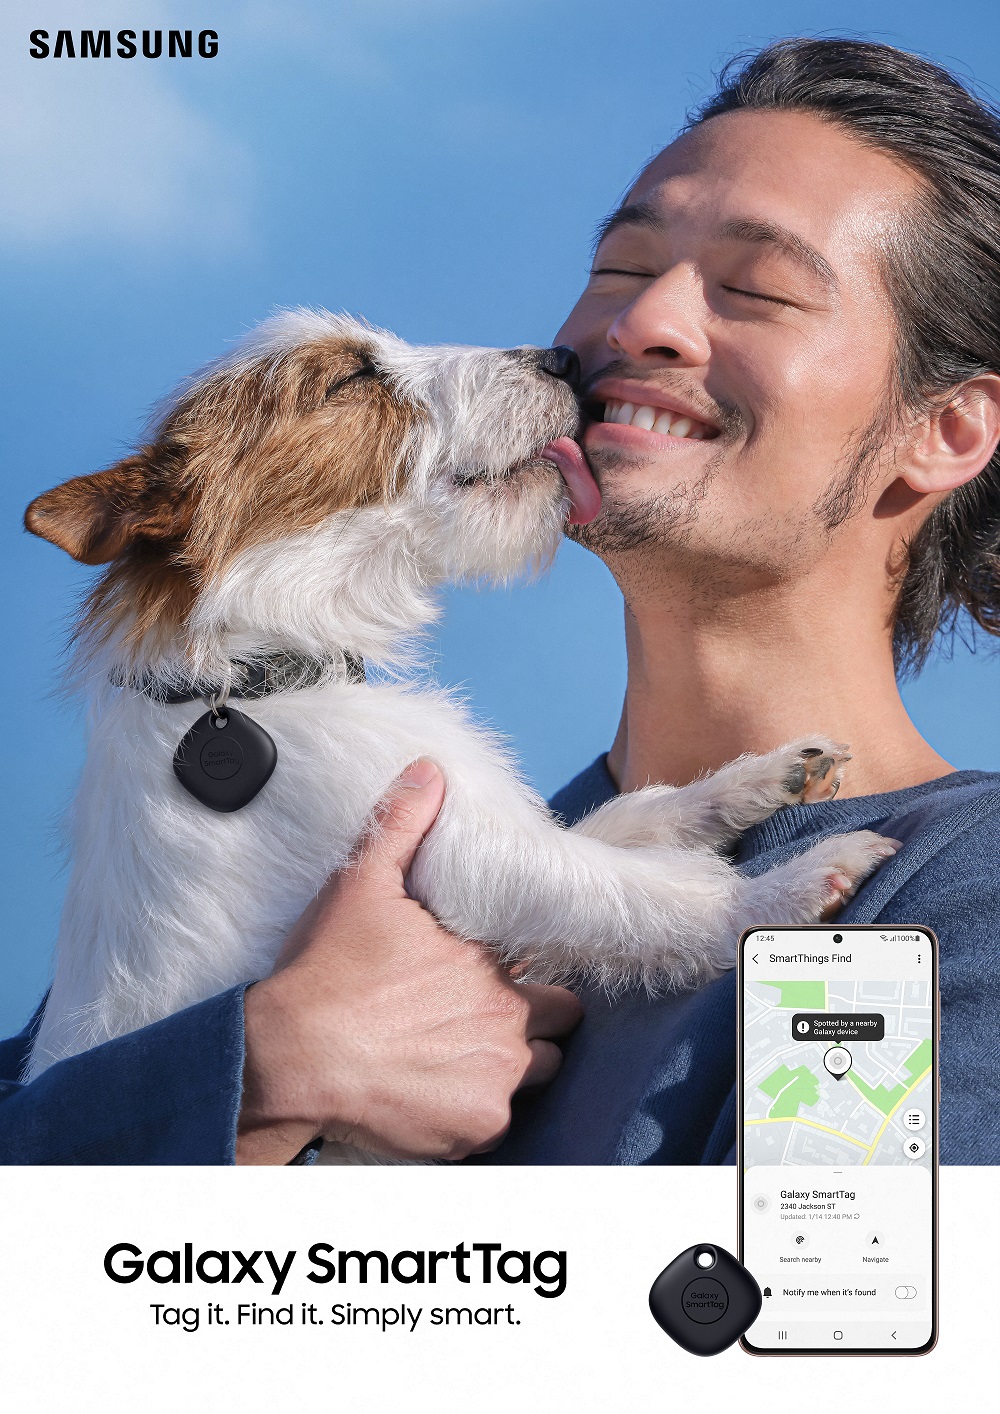 Dog with SmartTag dongle attached to collar licking man's face with UI of SmartTag visible in smartphone to the left